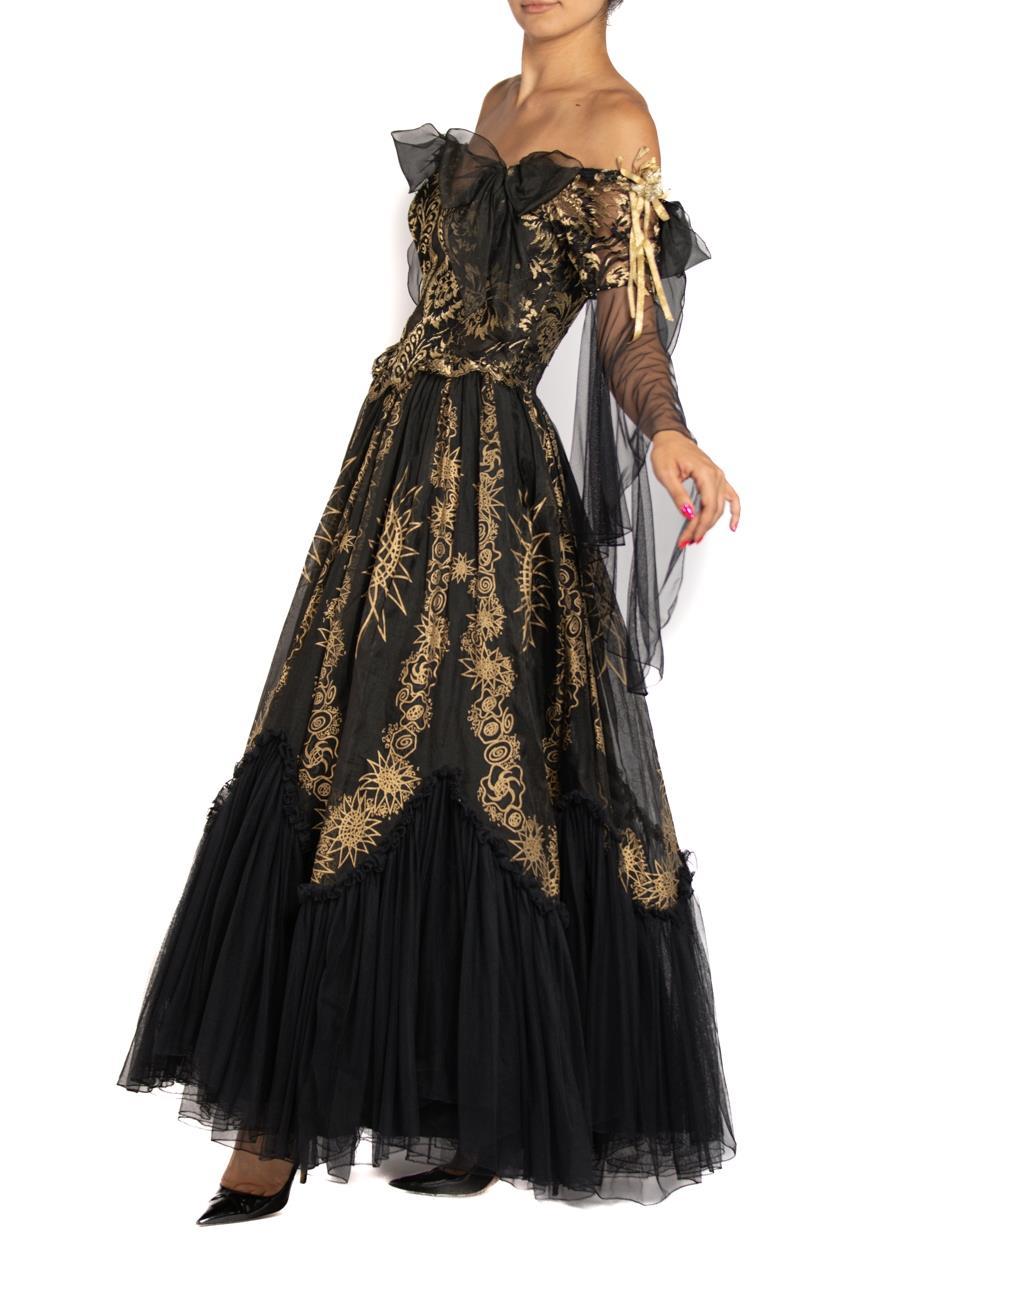 1980S ZANDRA RHODES Black & Gold Lace Ball Gown In Excellent Condition For Sale In New York, NY